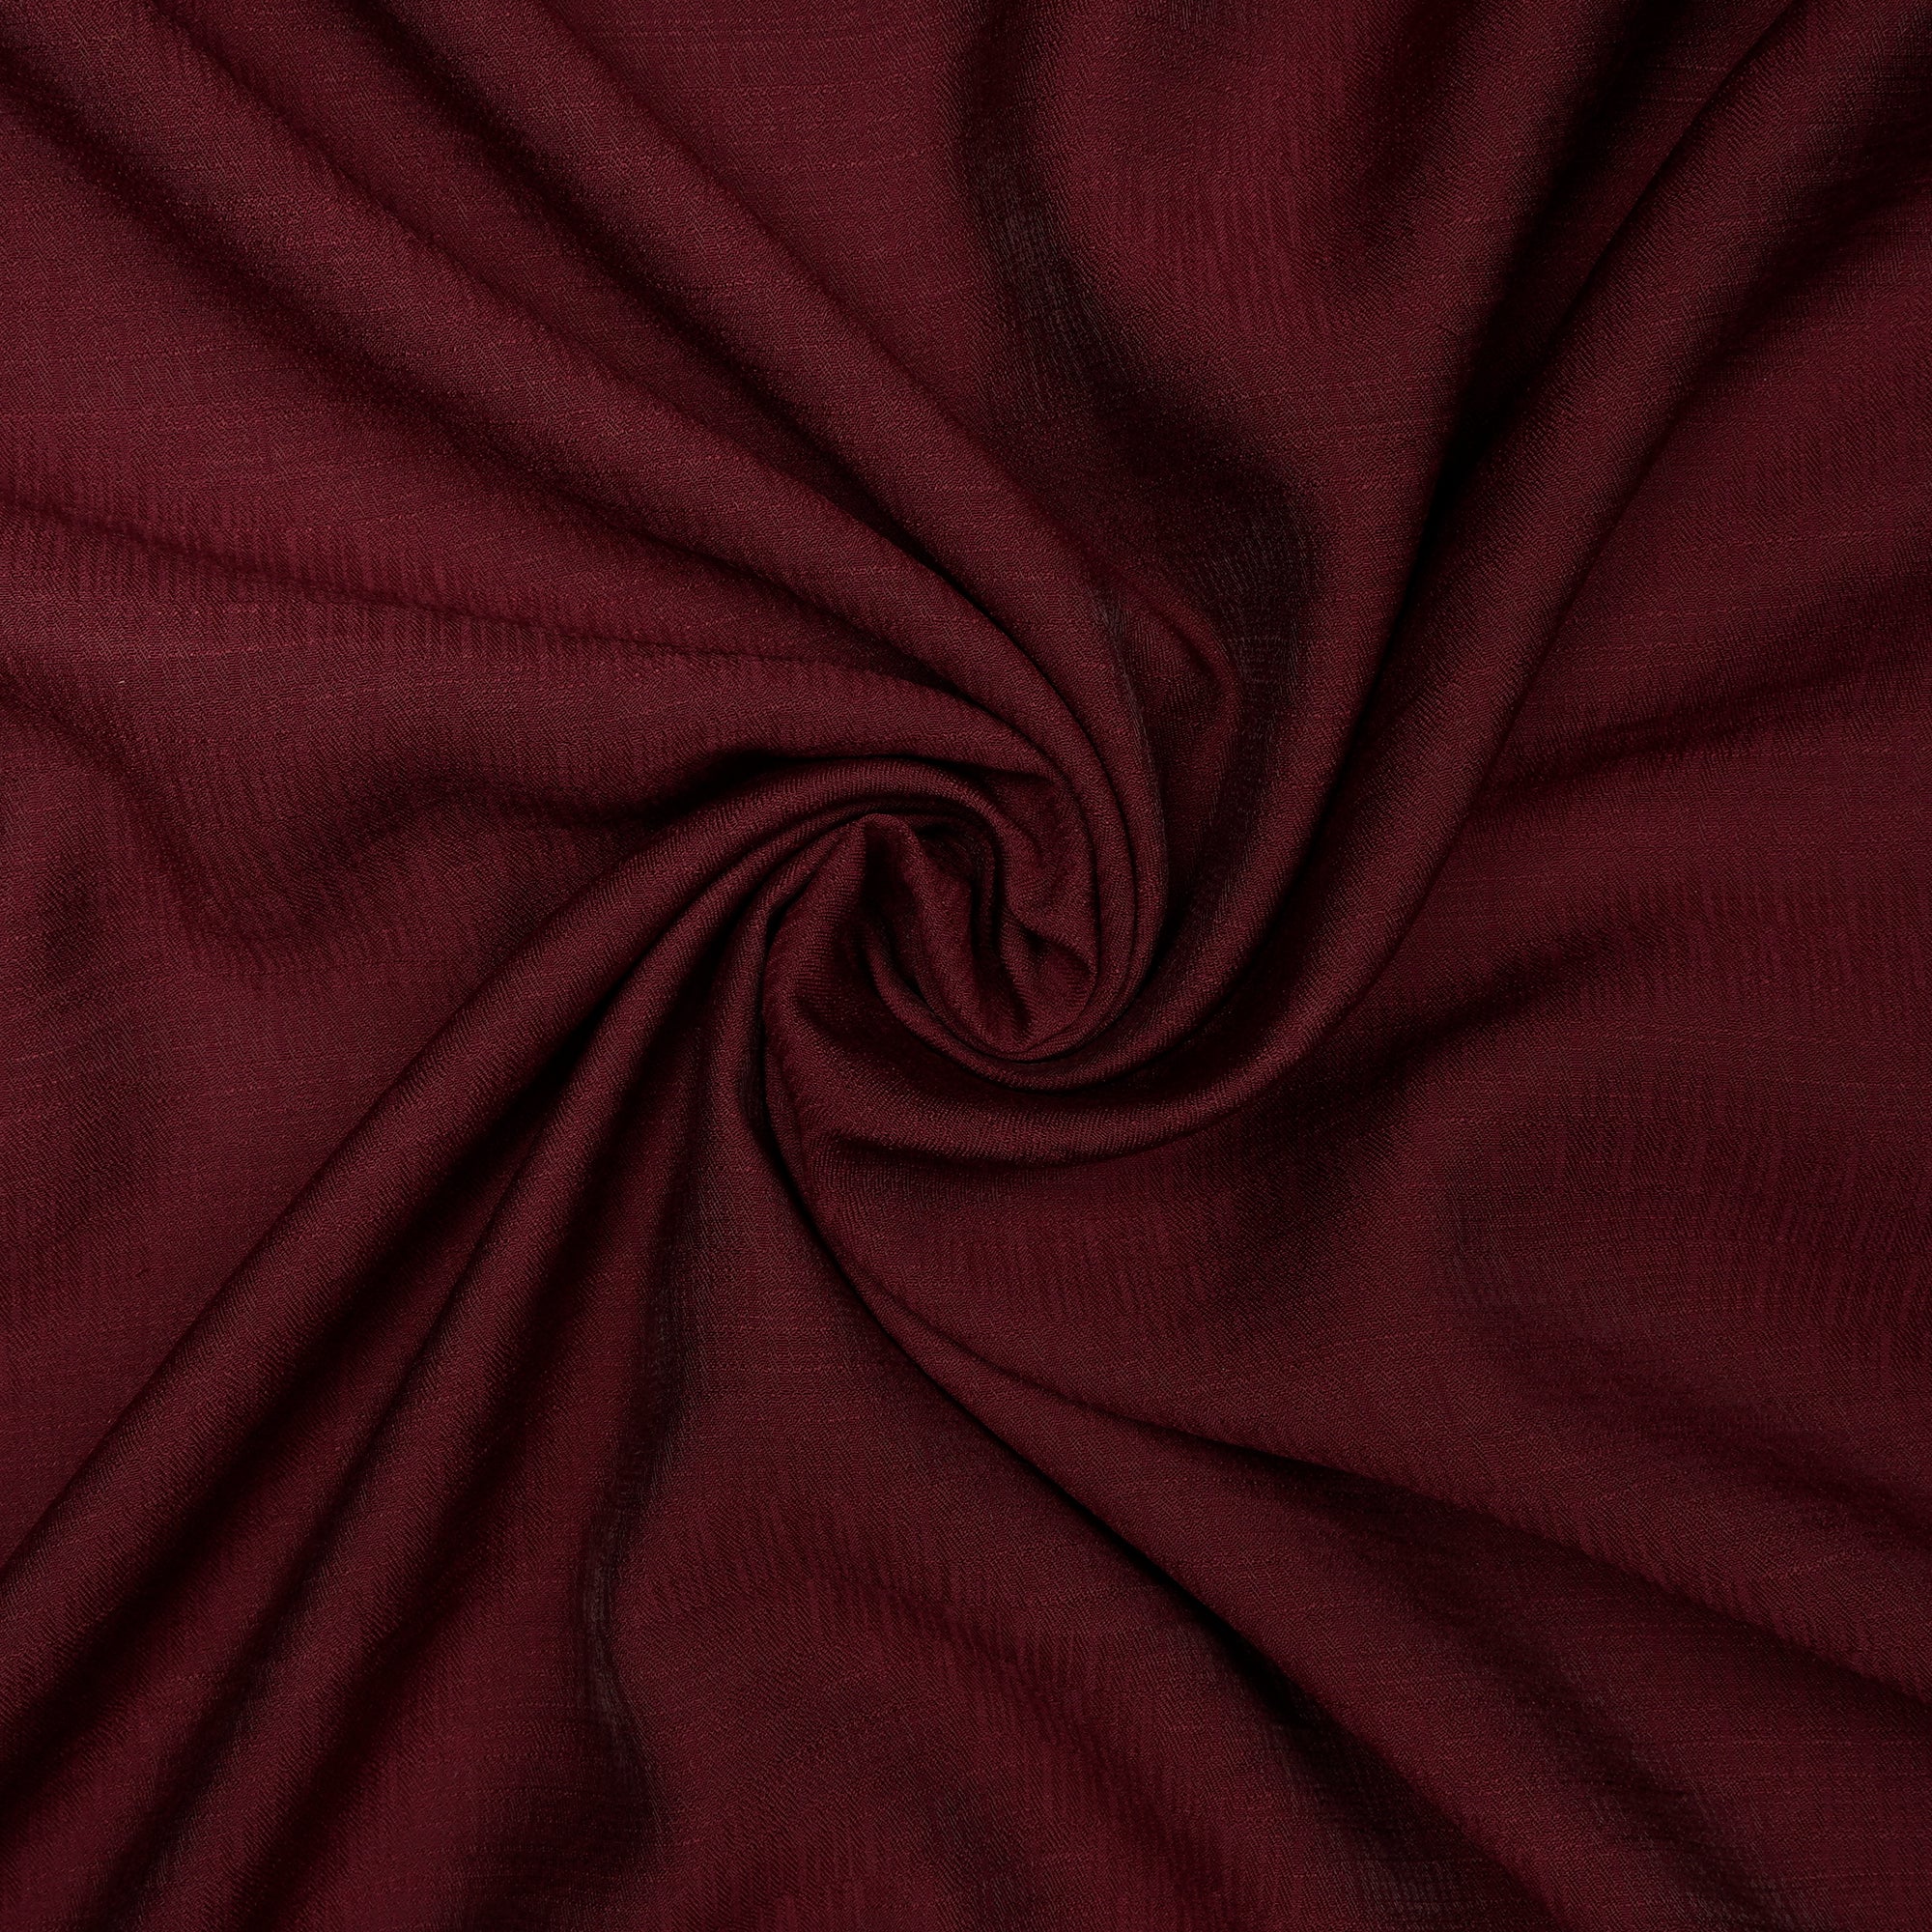 Maroon Solid Dyed Imported Poly Slub Fabric (60" Width)